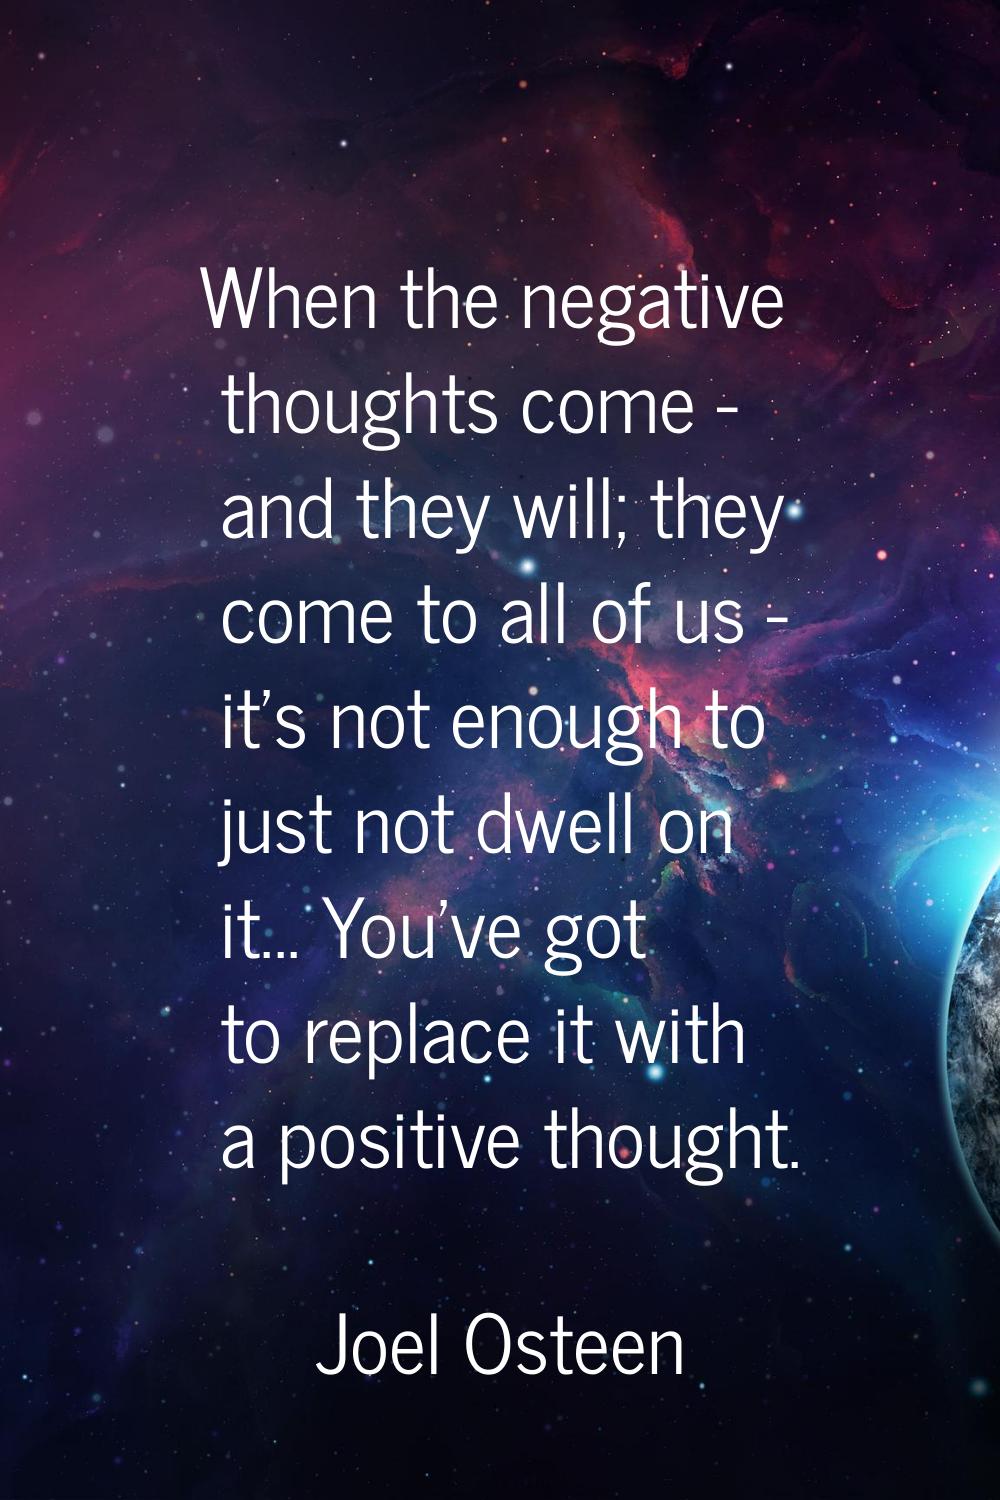 When the negative thoughts come - and they will; they come to all of us - it's not enough to just n